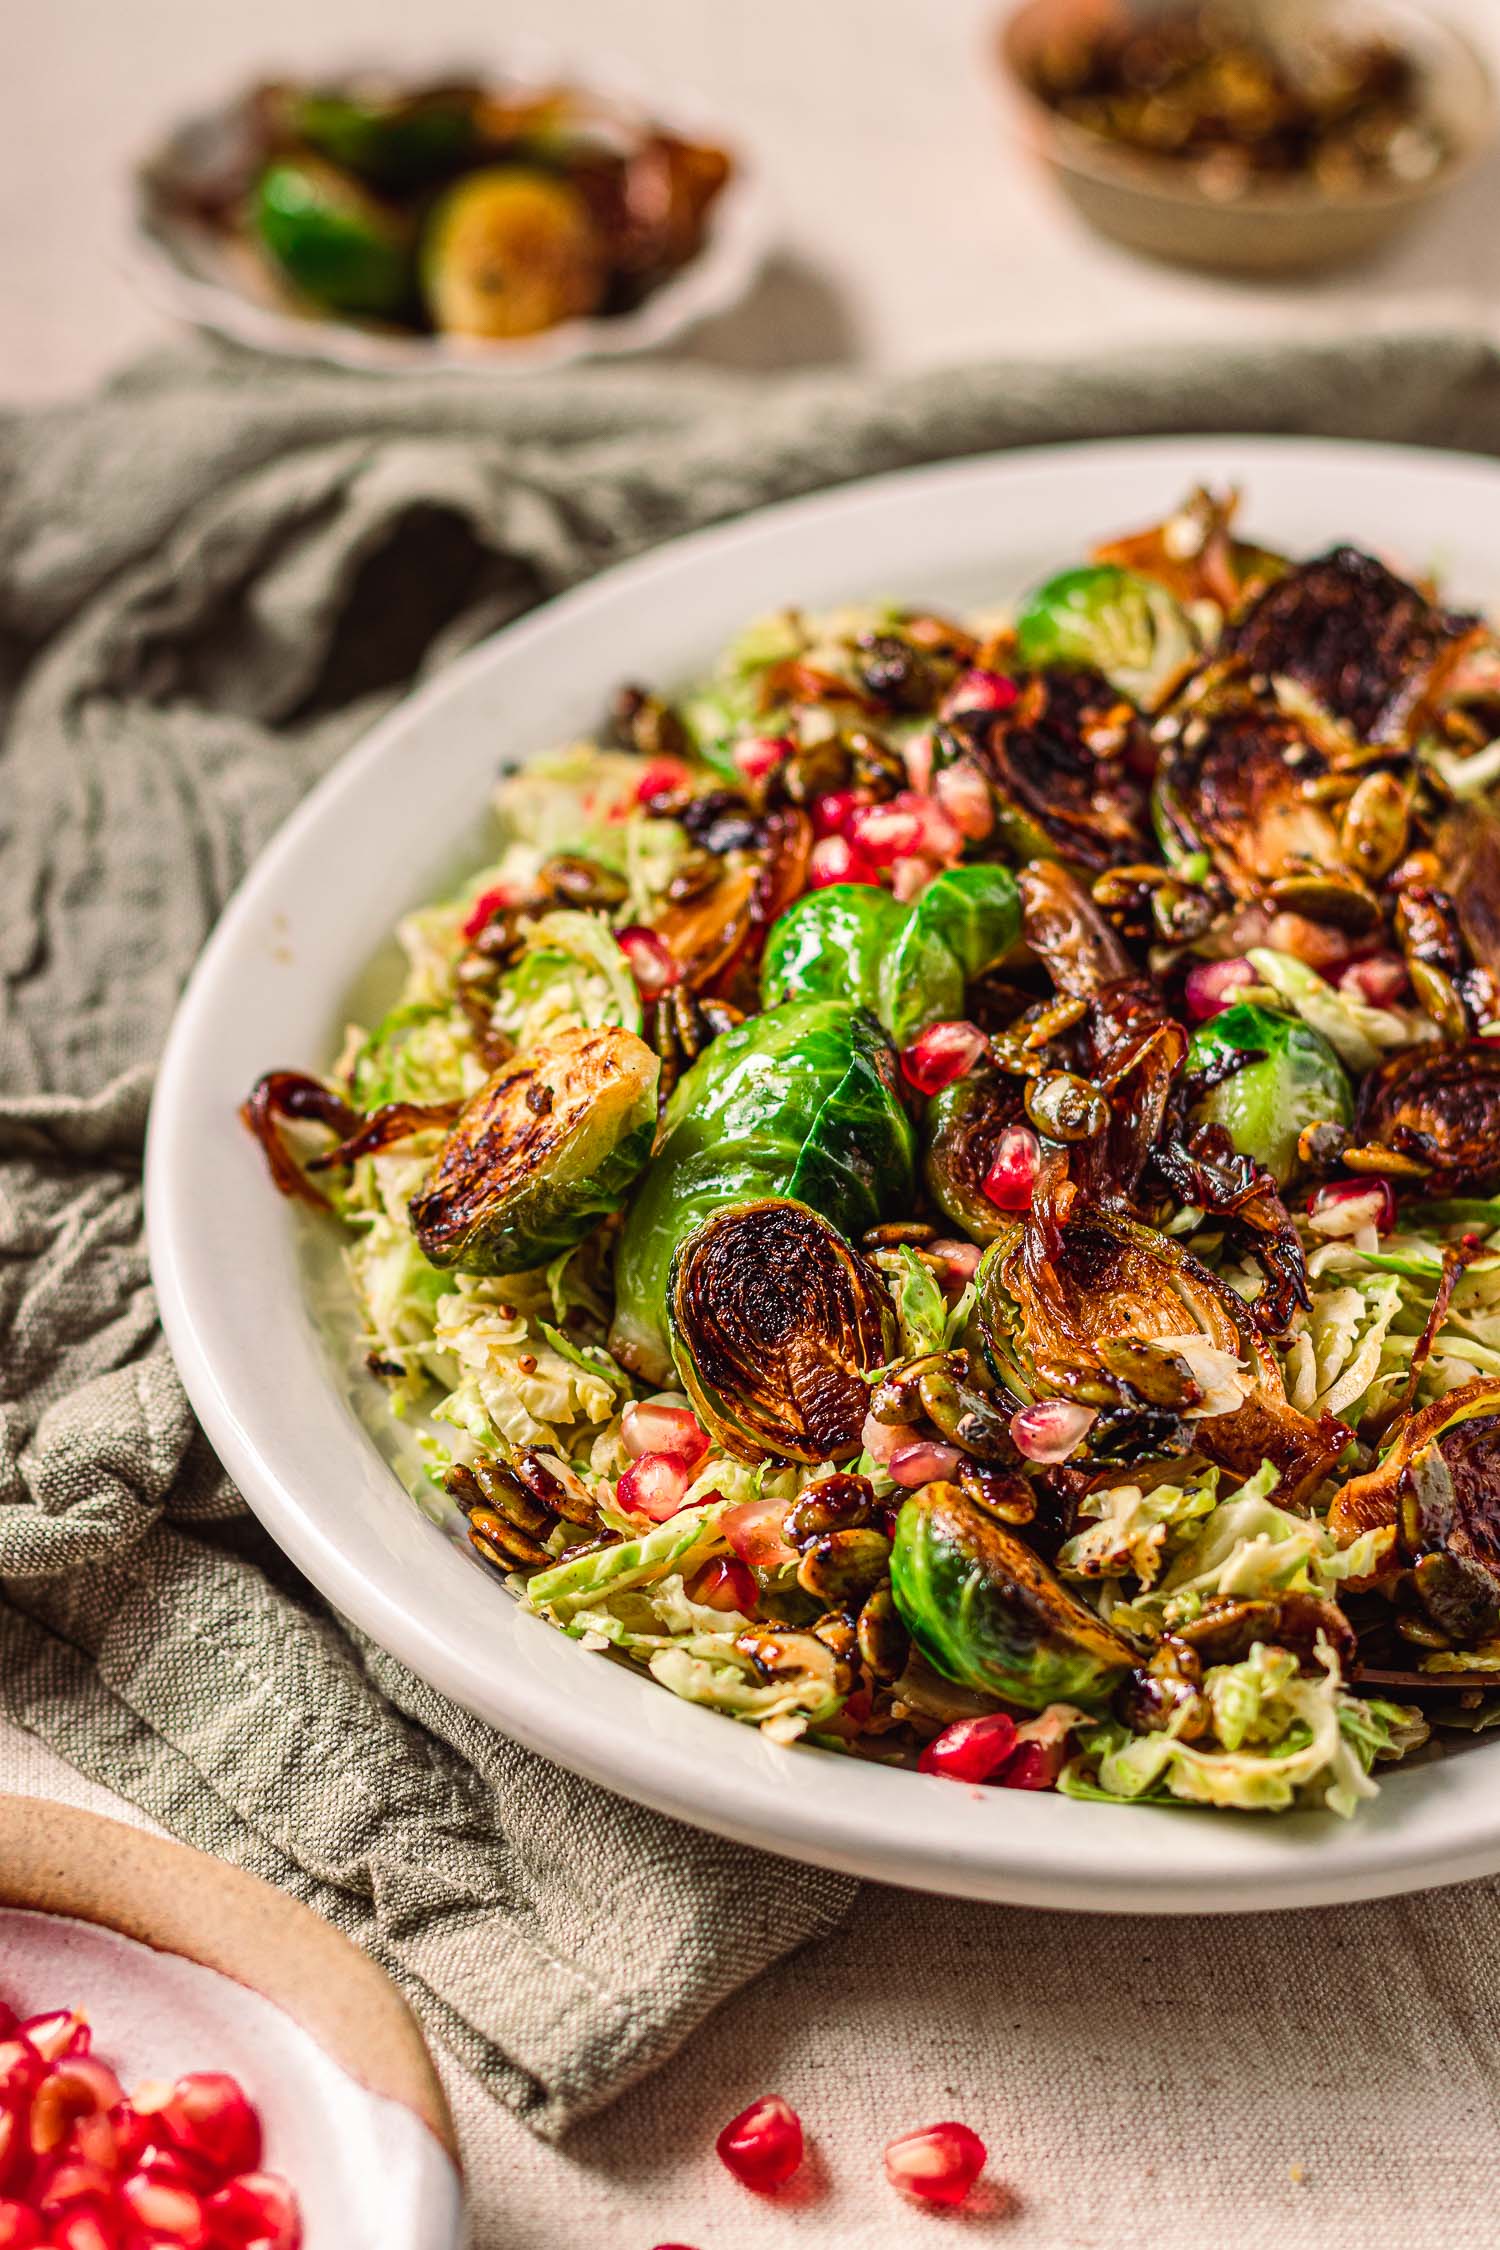 Caramelized Brussel Sprouts salad